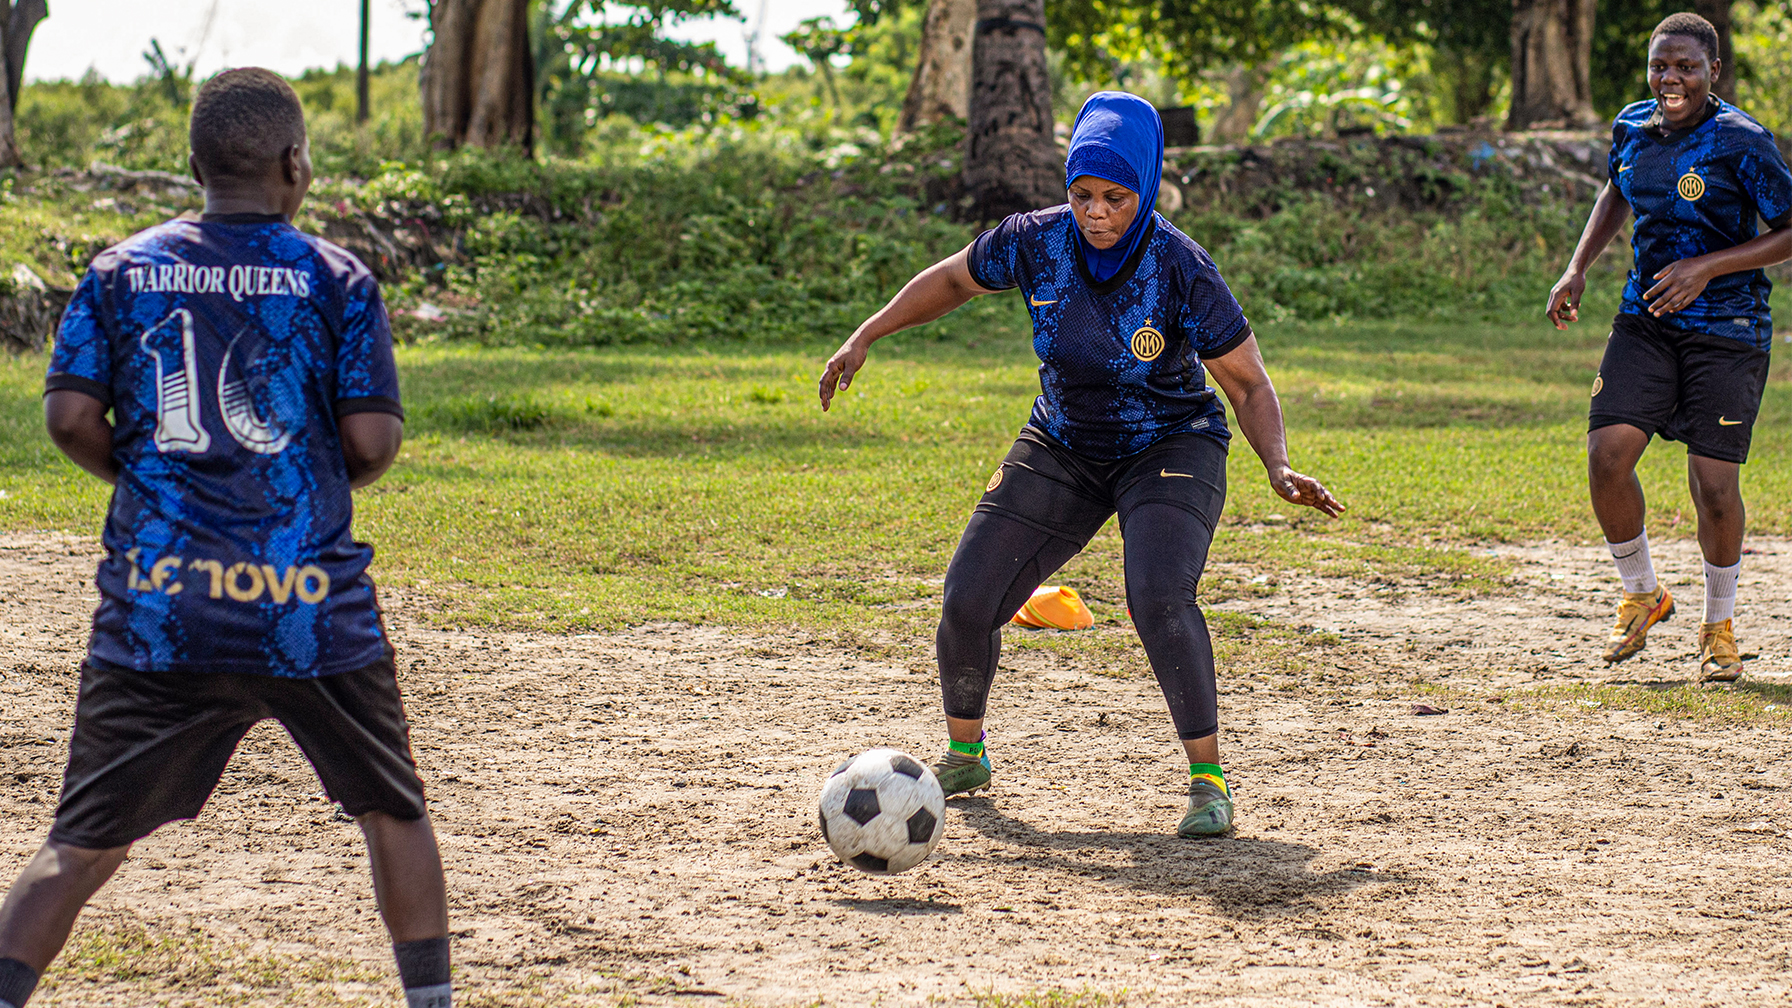  Neema Othman, coach of Warrior Queens FC trains with two men